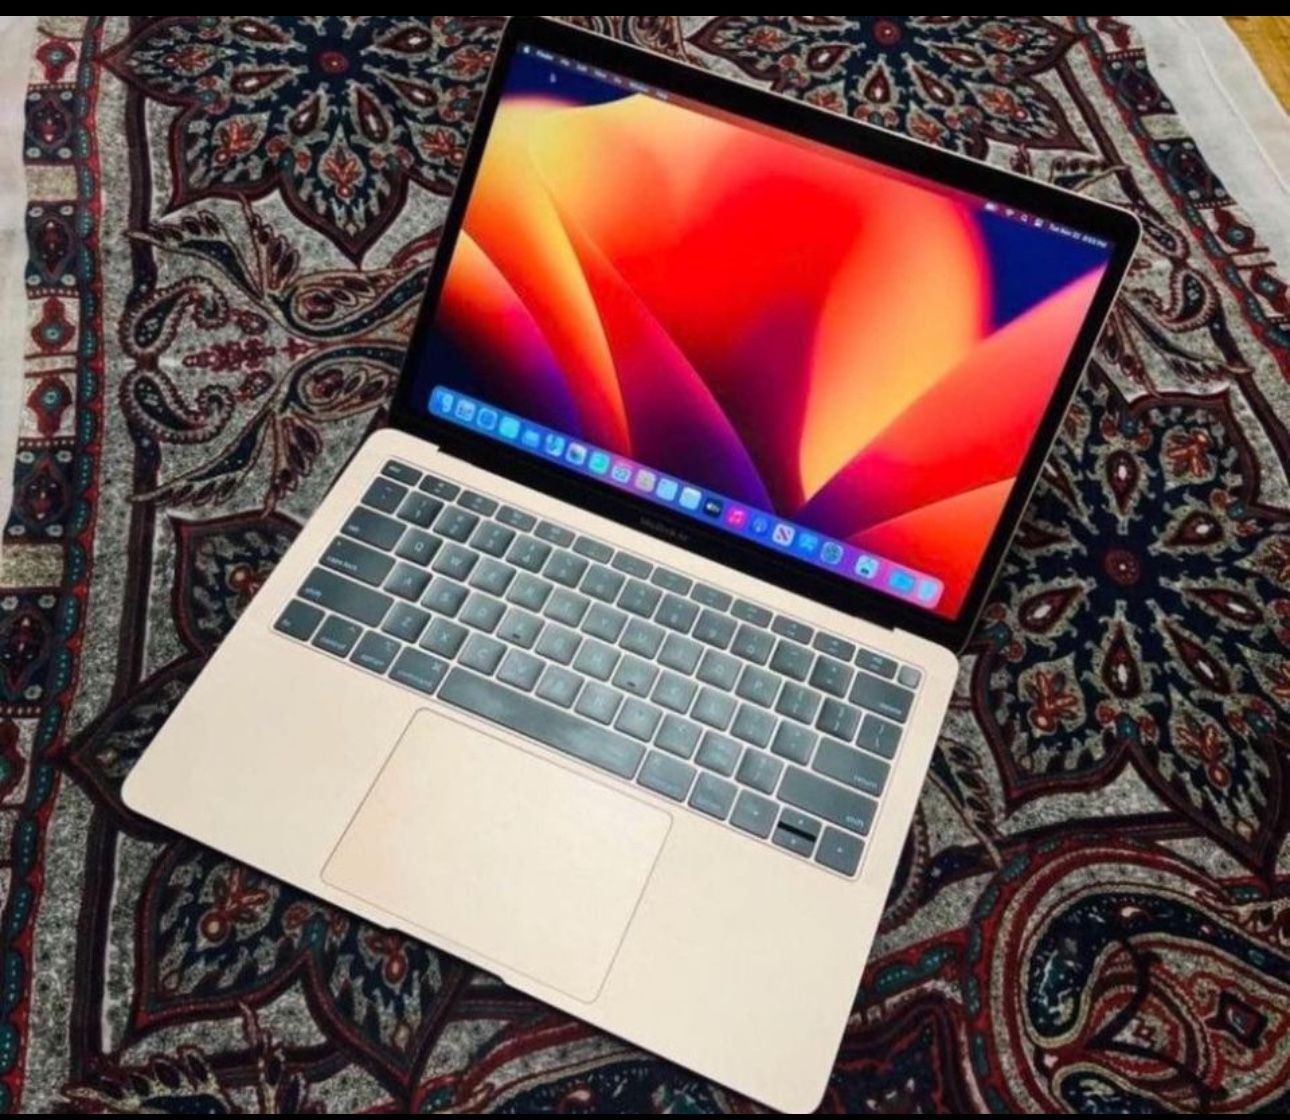 Apple Macbook Air Ratina 13 inch 2018 512GB SSD 1.6GHz i5 8GB Ram Rose Gold Color